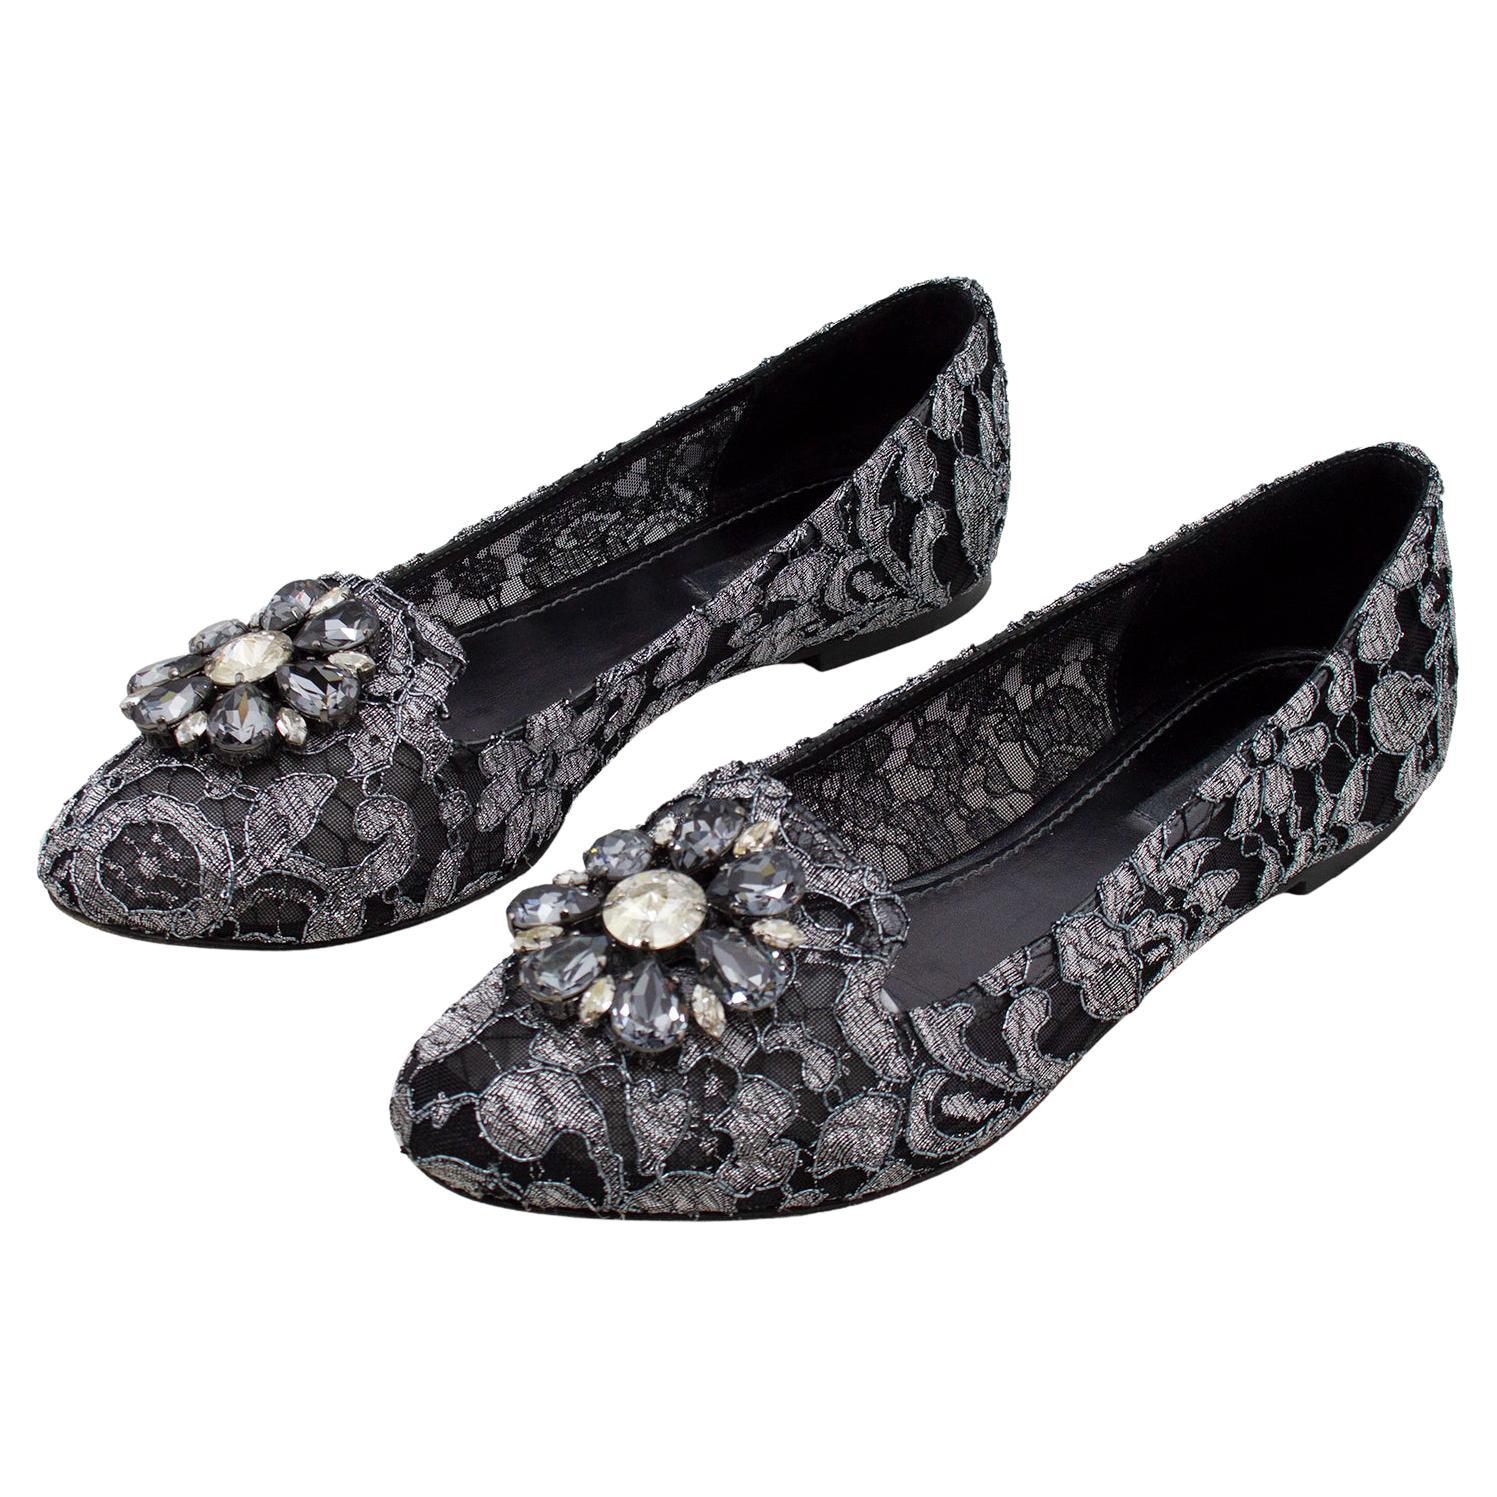 Dolce and Gabbana Black and Silver Vally Embellished Lace Ballet Flats